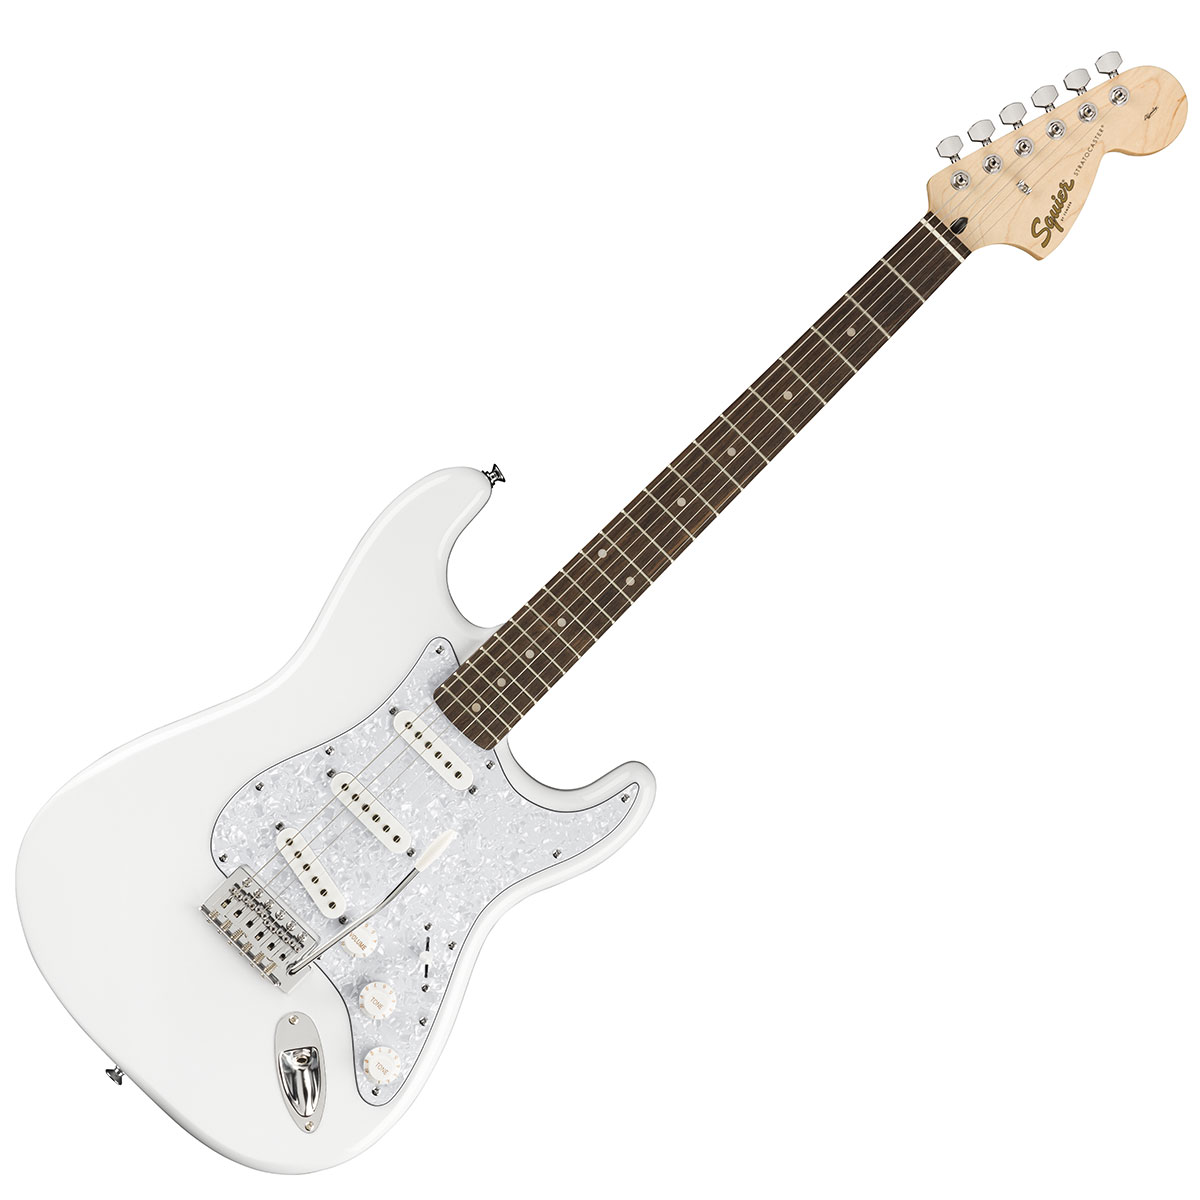 Squier by Fender FSR Affinity stratocaster White Pearl ストラトキャスター エレキギター